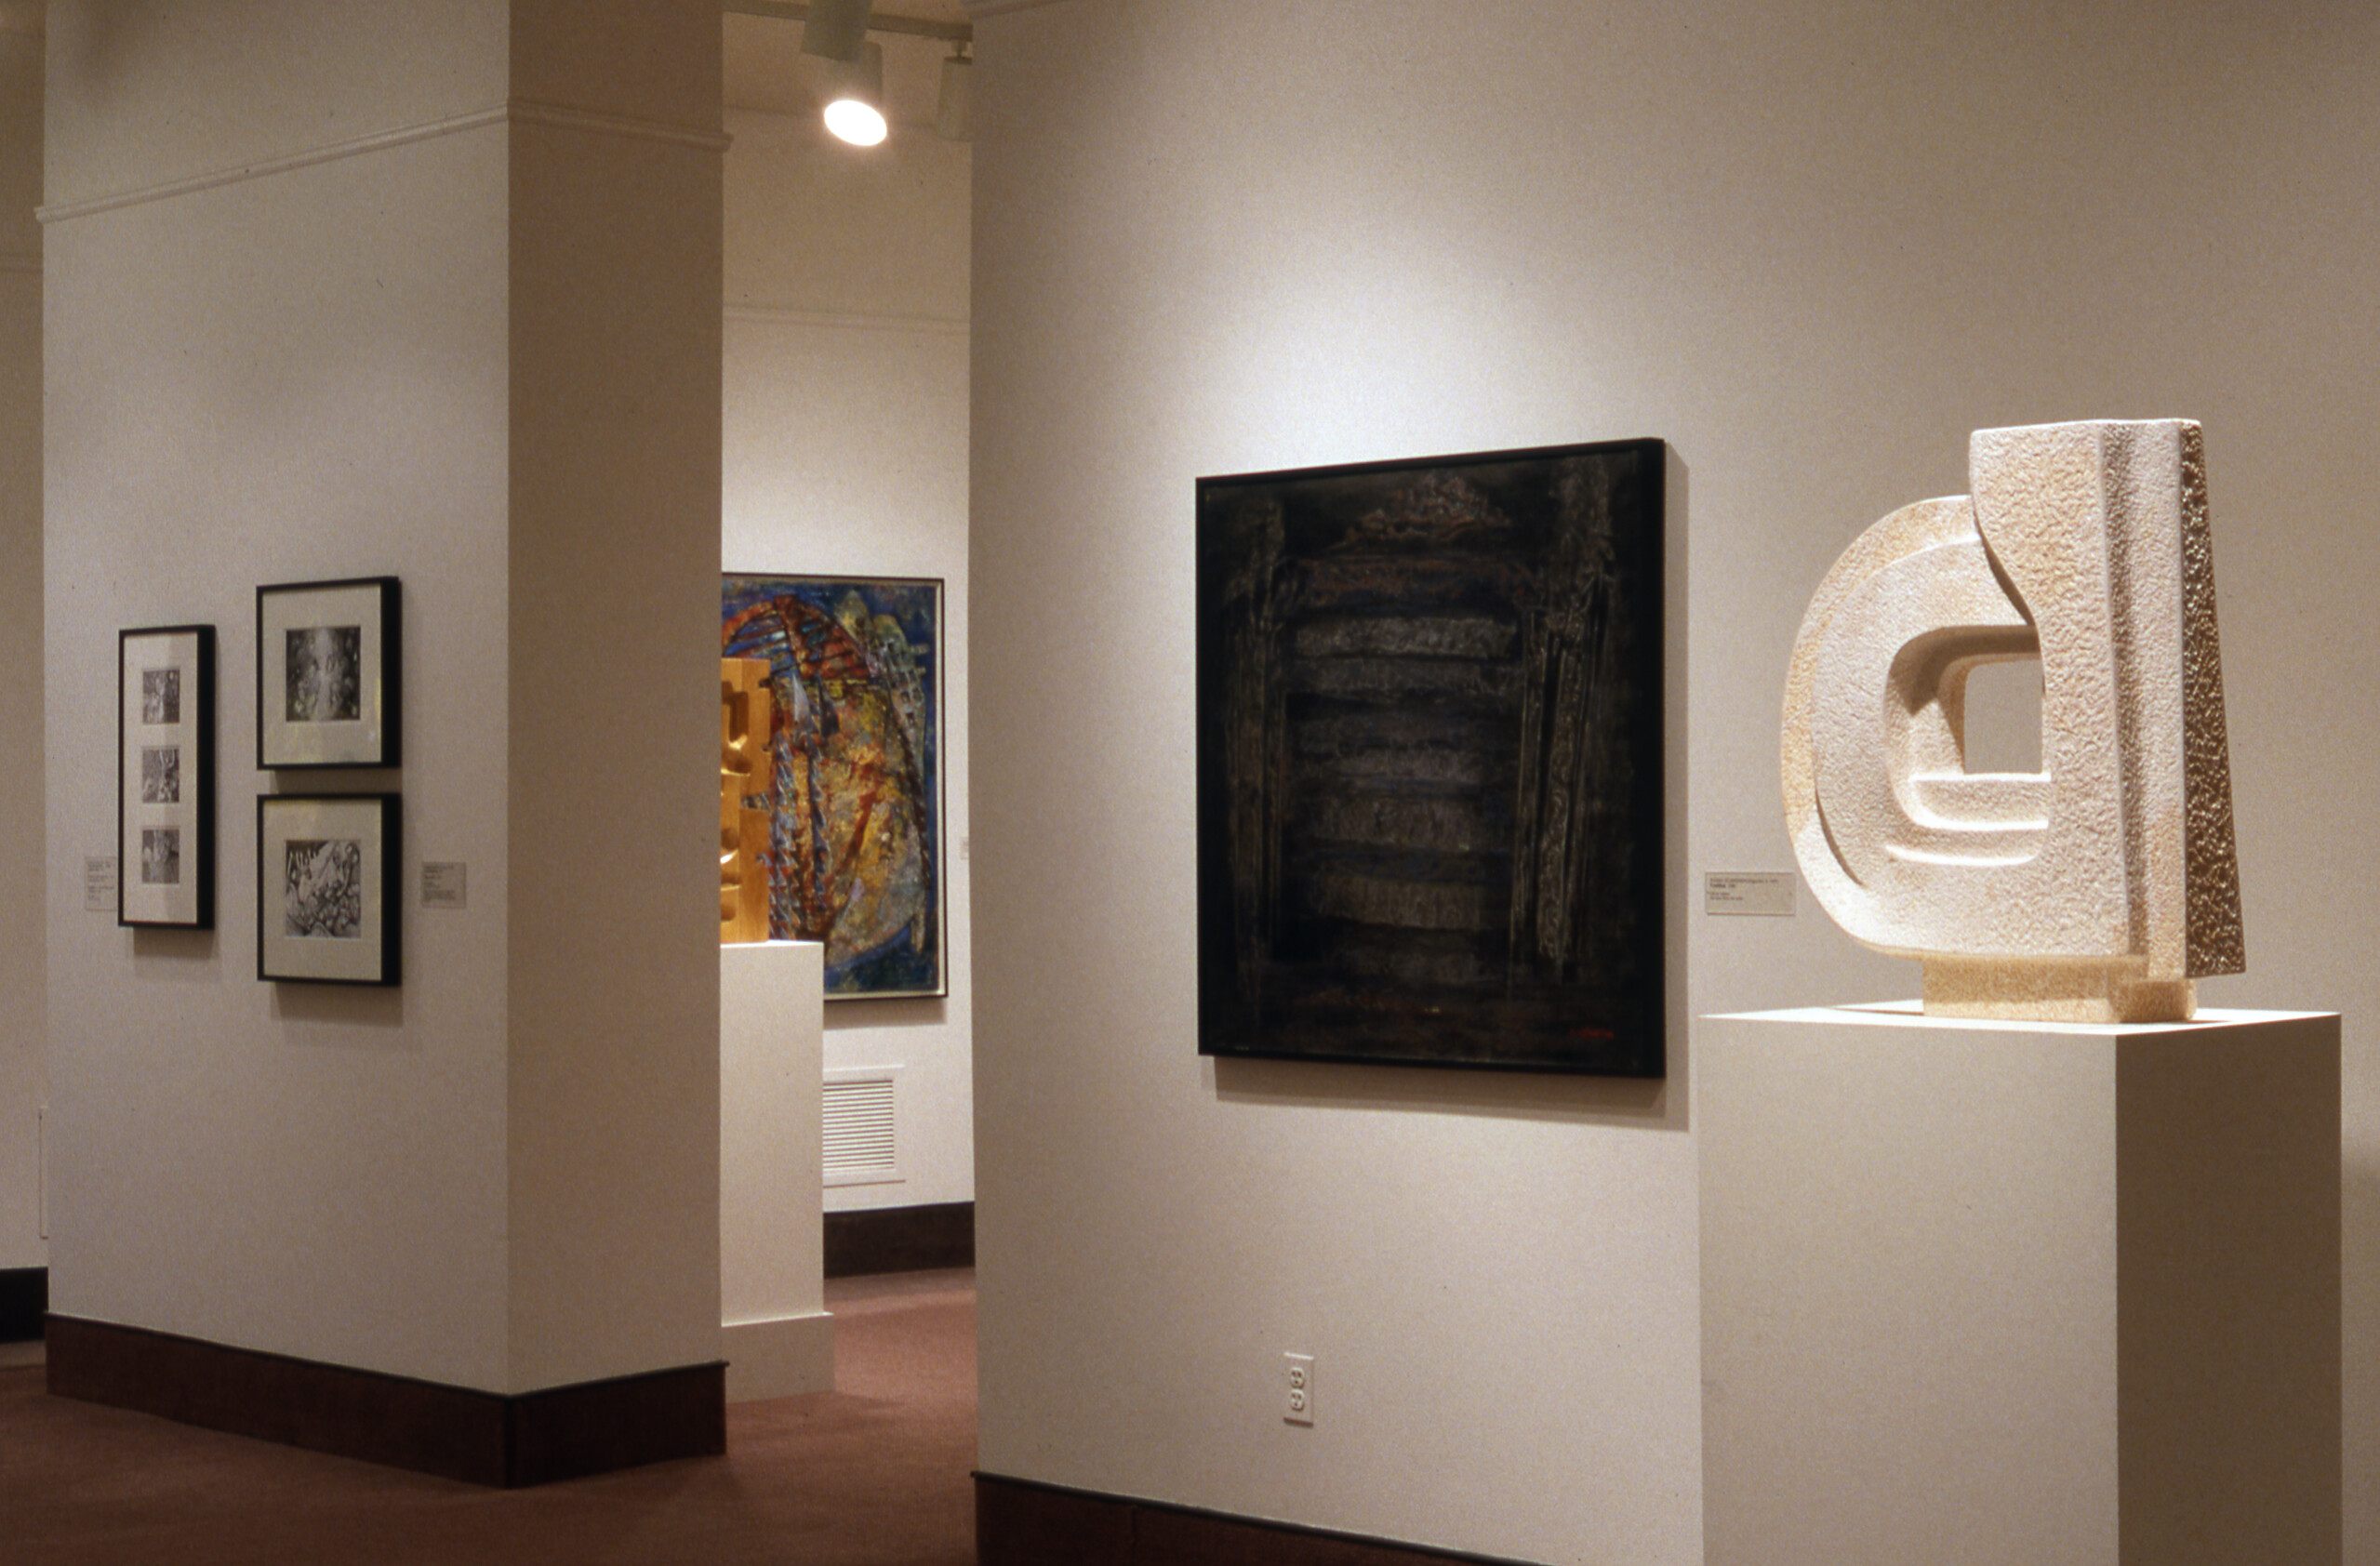 A view of a gallery space with several sculptures and paintings. A large white abstract sculpture is standing on the right, right next to an abstract painting in black, juxtaposing each other.